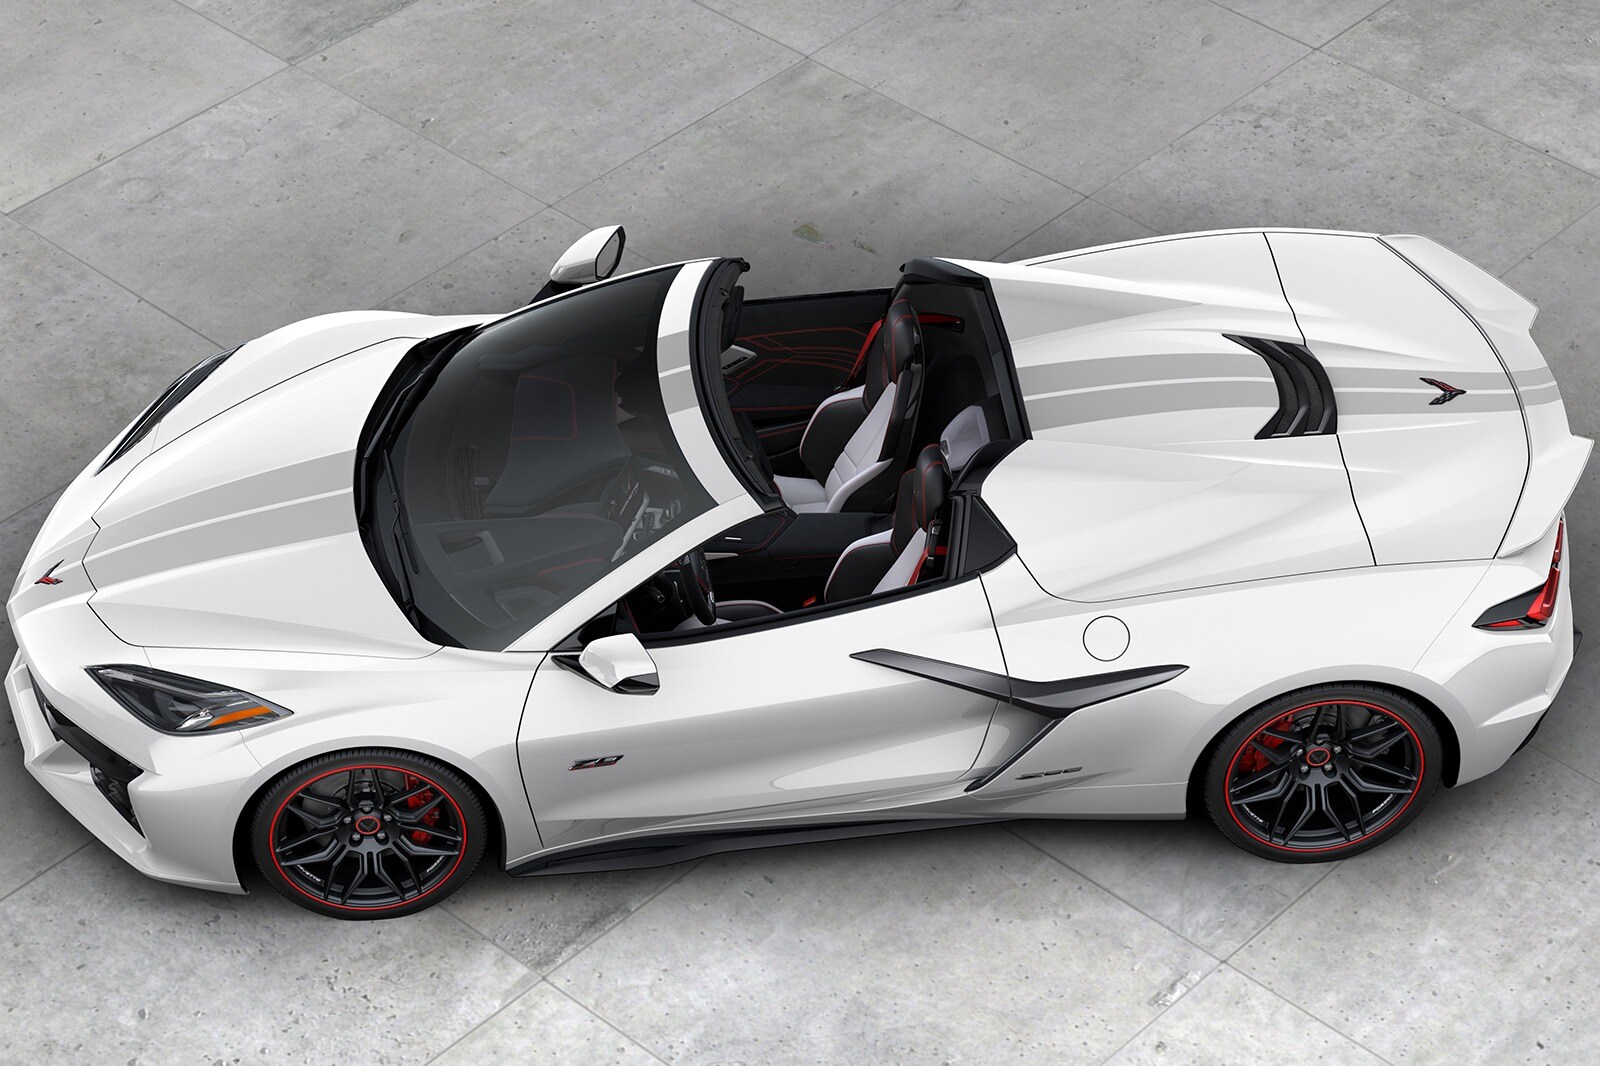 Chevrolet Is Throwing the 2023 Corvette a 70th Birthday Party